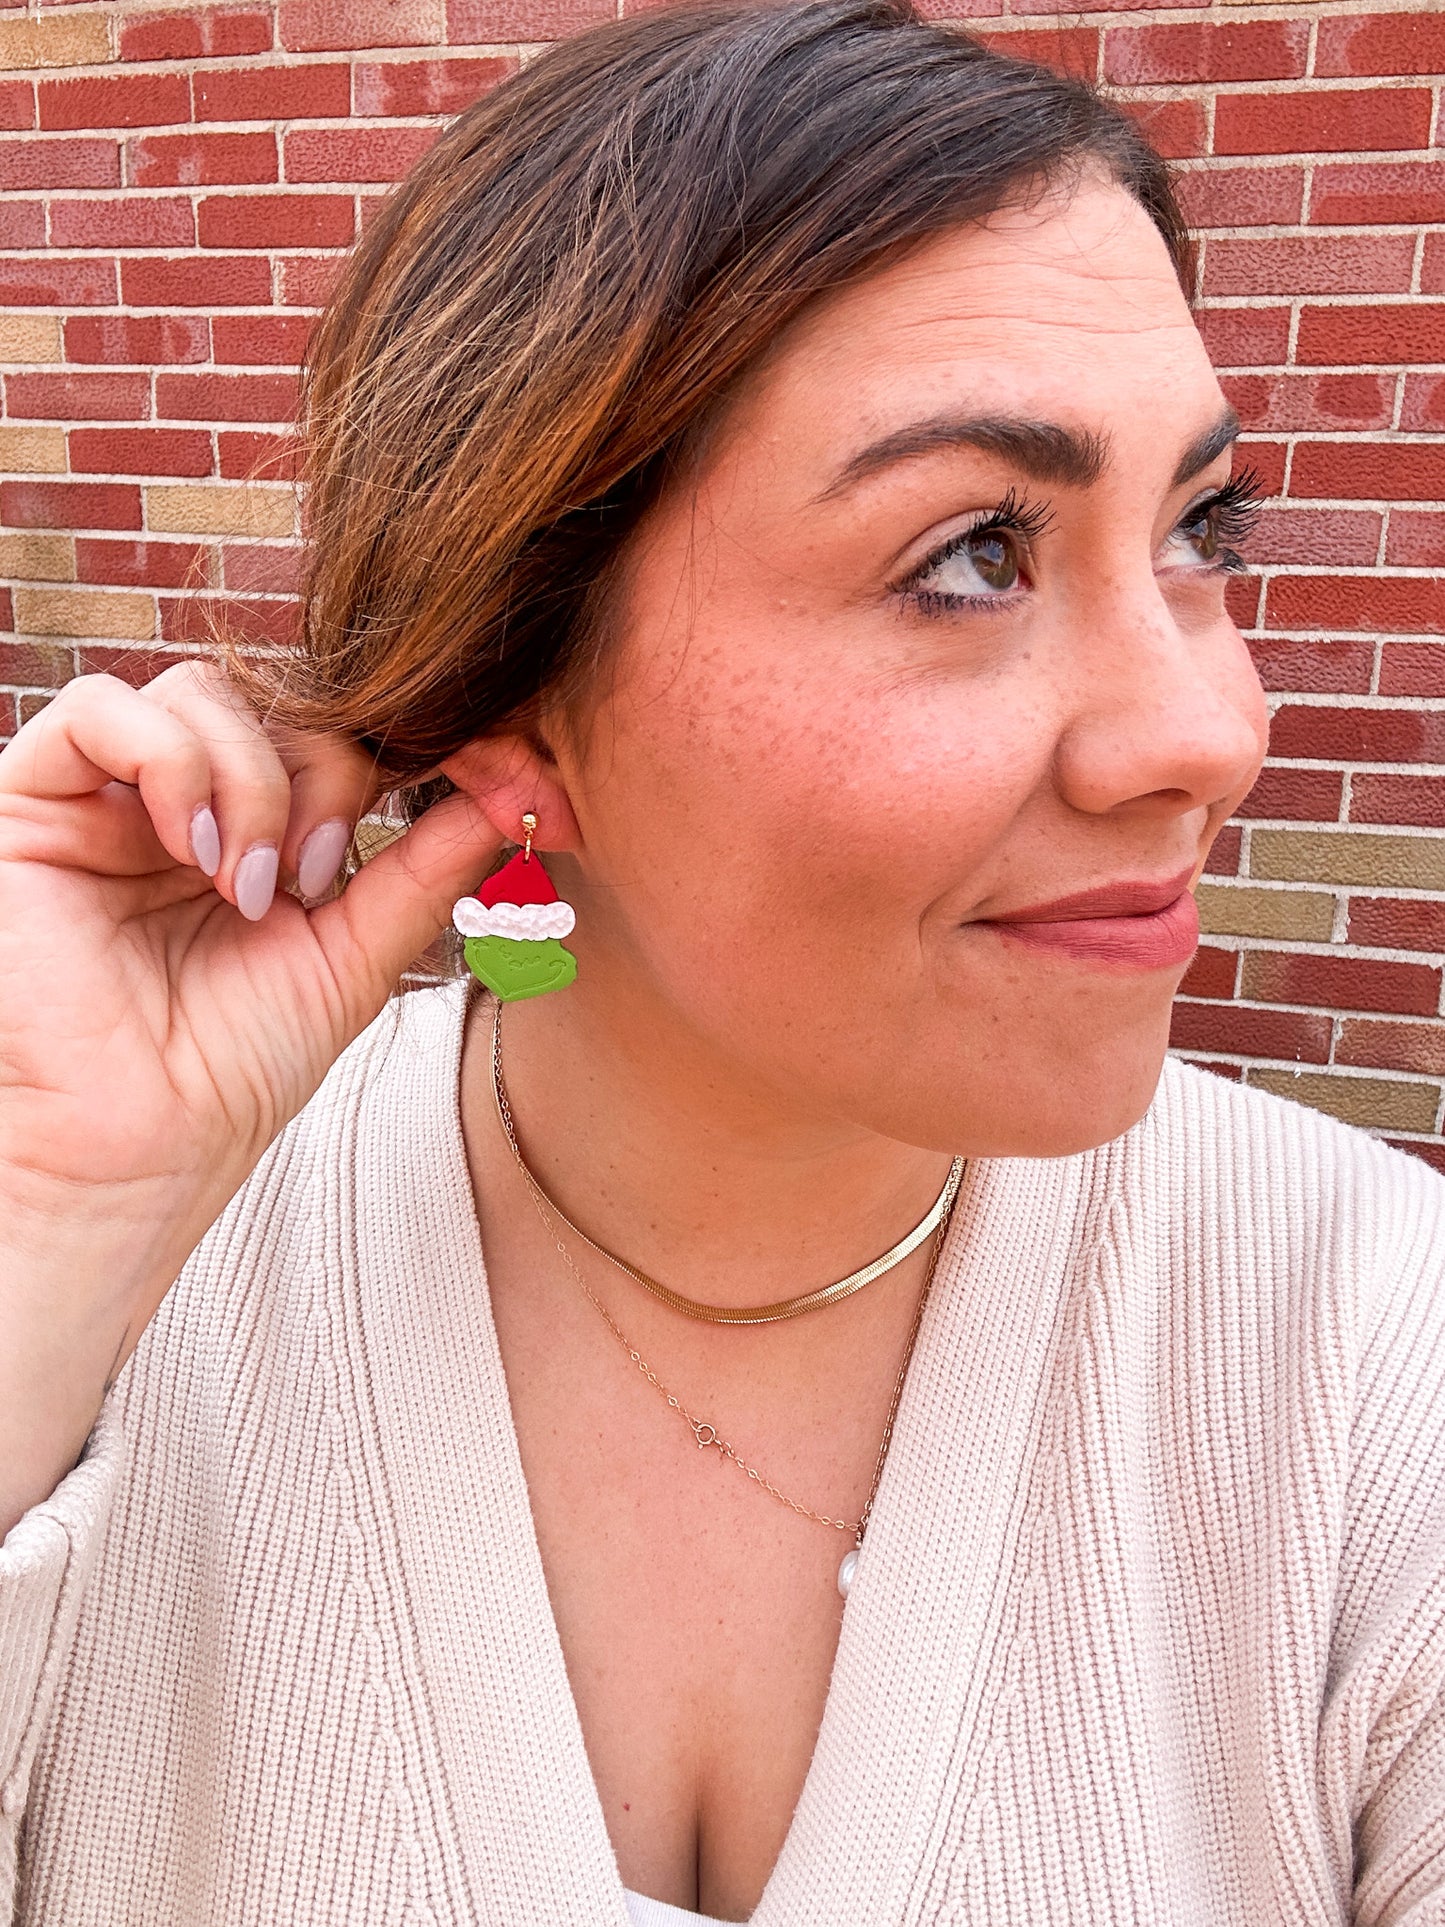 You're a Mean One Mr. Grinch Clay Earrings | Grinch Inspired | Christmas Earrings | Gift Earrings | Holiday Colors | Lightweight